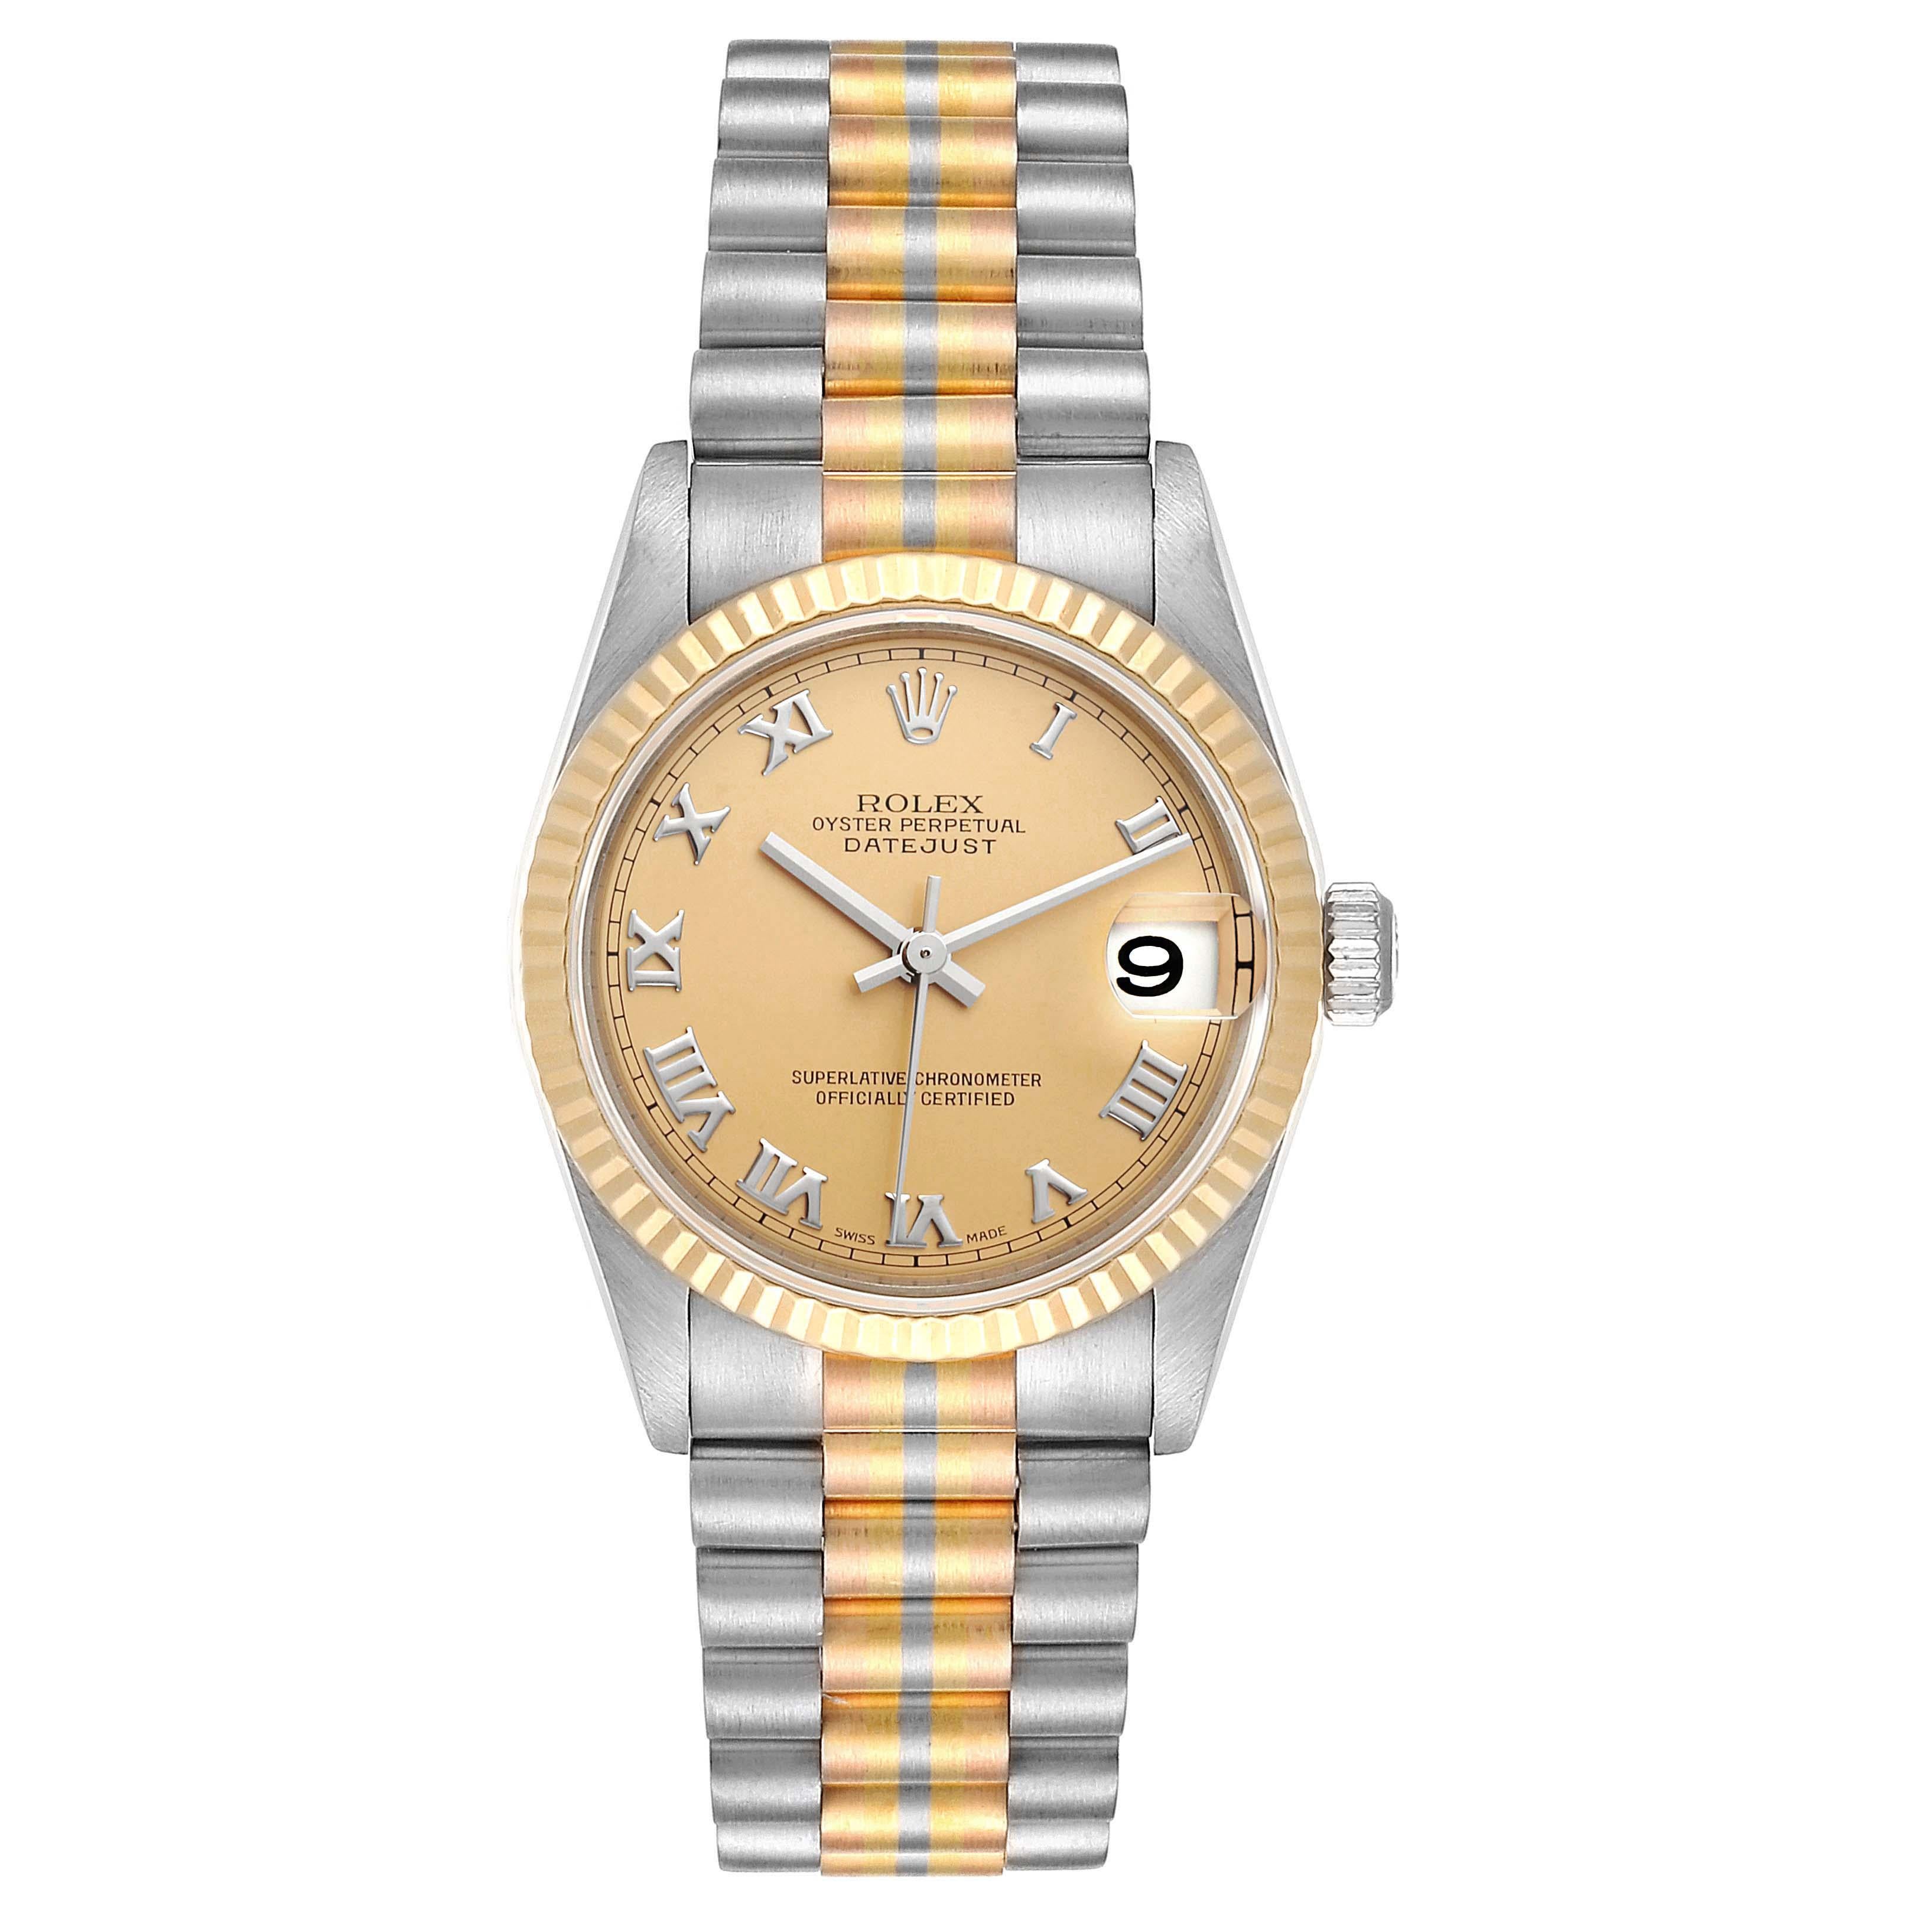 Rolex President Tridor 31 Midsize White Yellow Rose Gold Ladies Watch 78279. Officially certified chronometer self-winding movement. 18k white gold oyster case 31.0 mm in diameter. Rolex logo on a crown. 18K yellow gold fluted bezel. Scratch